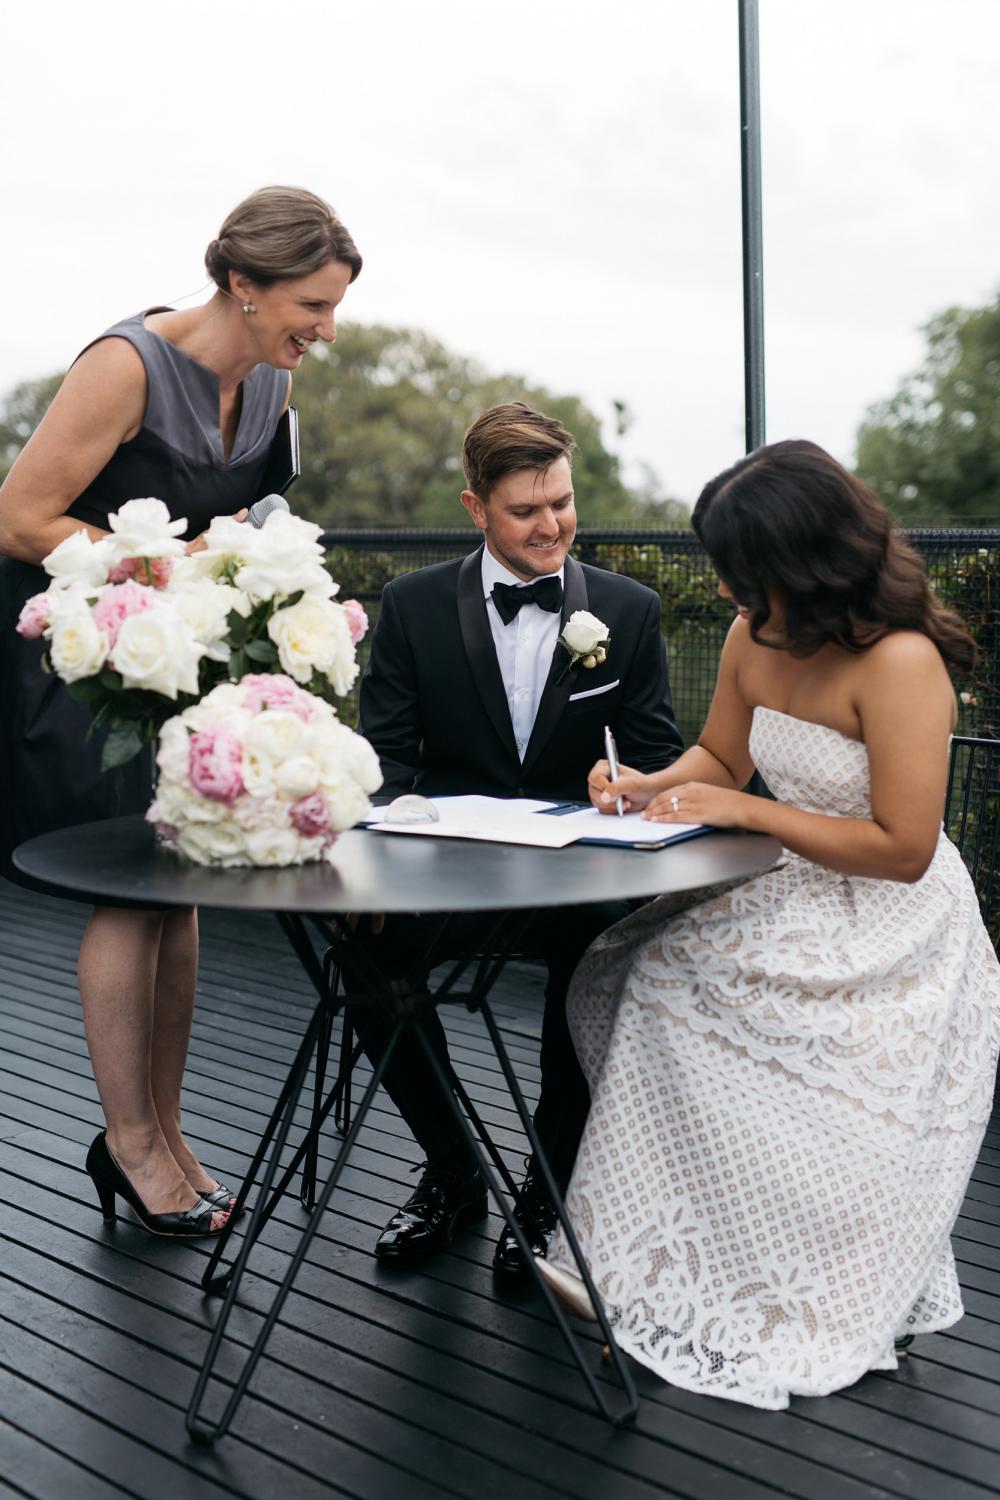 Celebrant witnesses the bride and groom signing the register during wedding ceremony